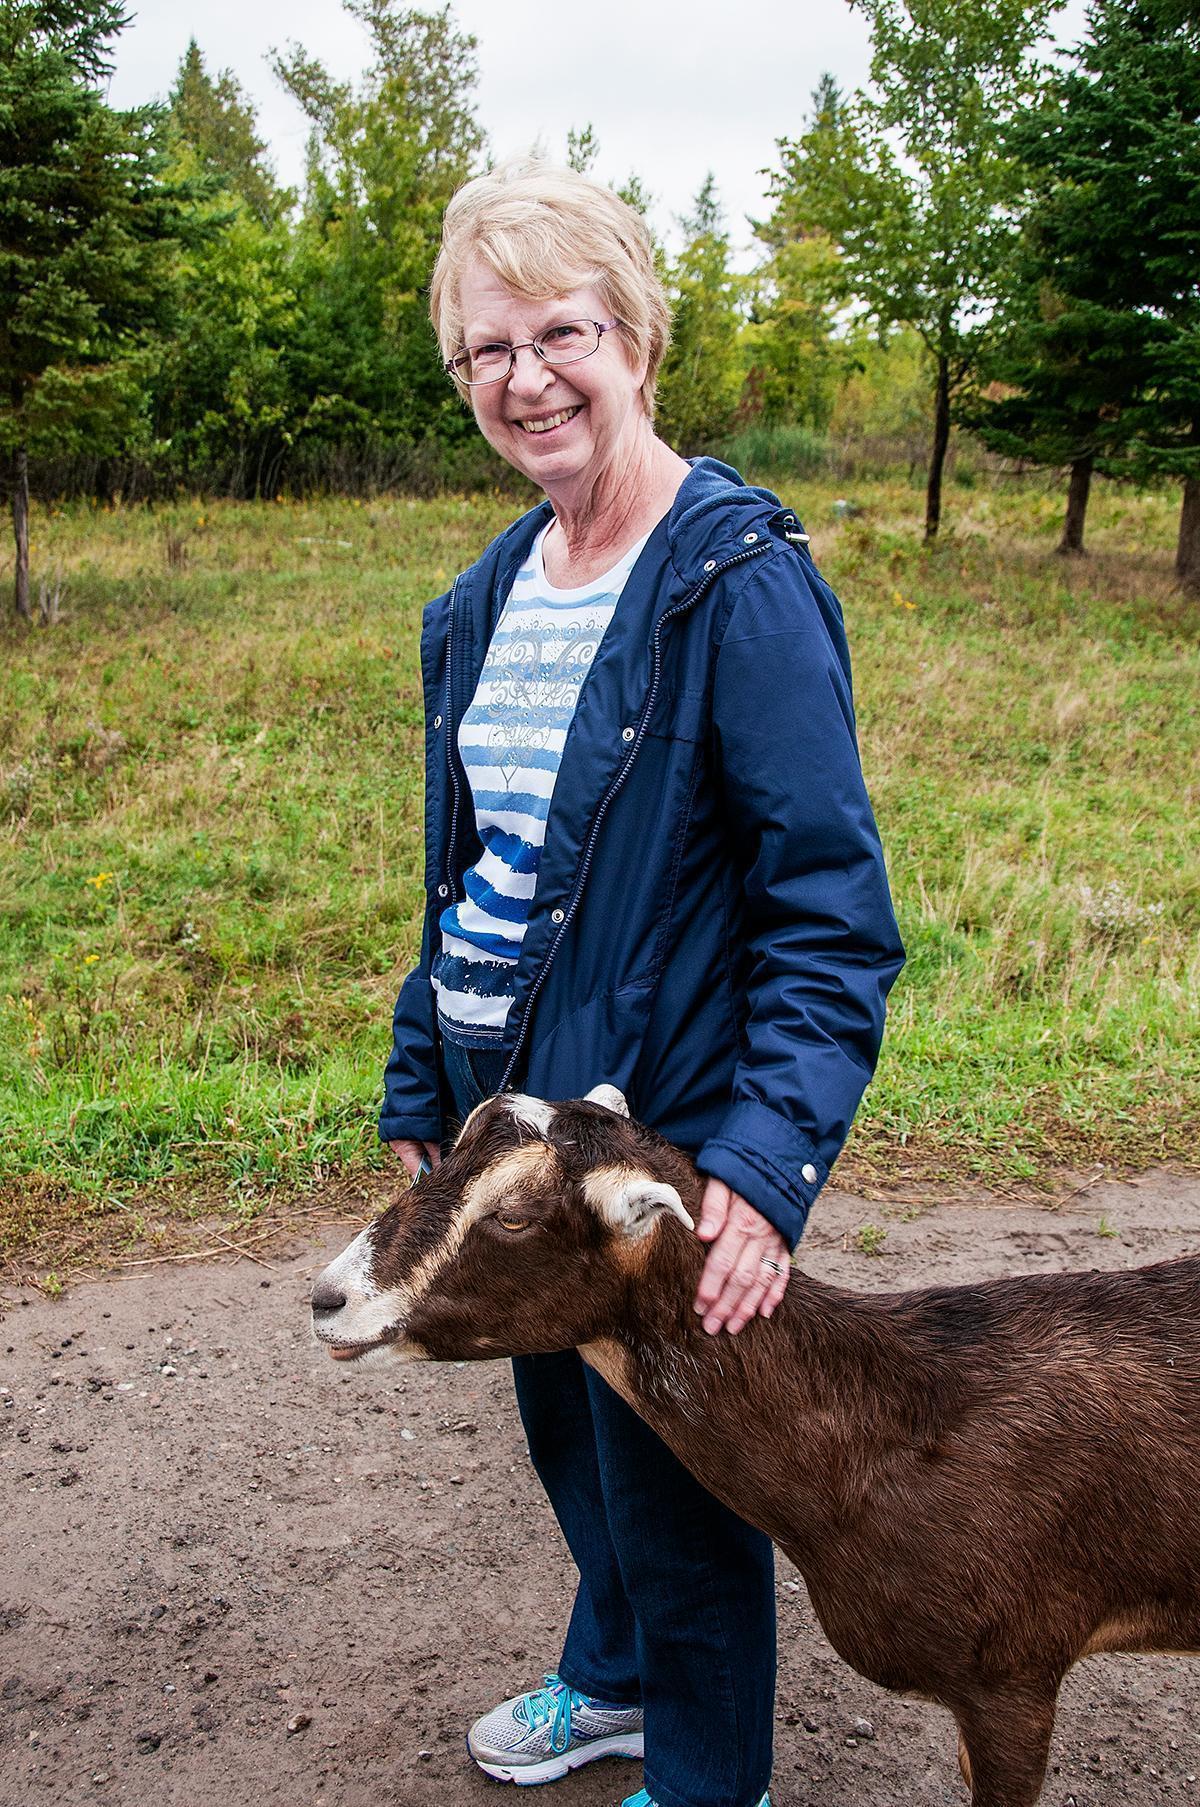 I'm pretty sure this goat gal wanted to go home with my mom.